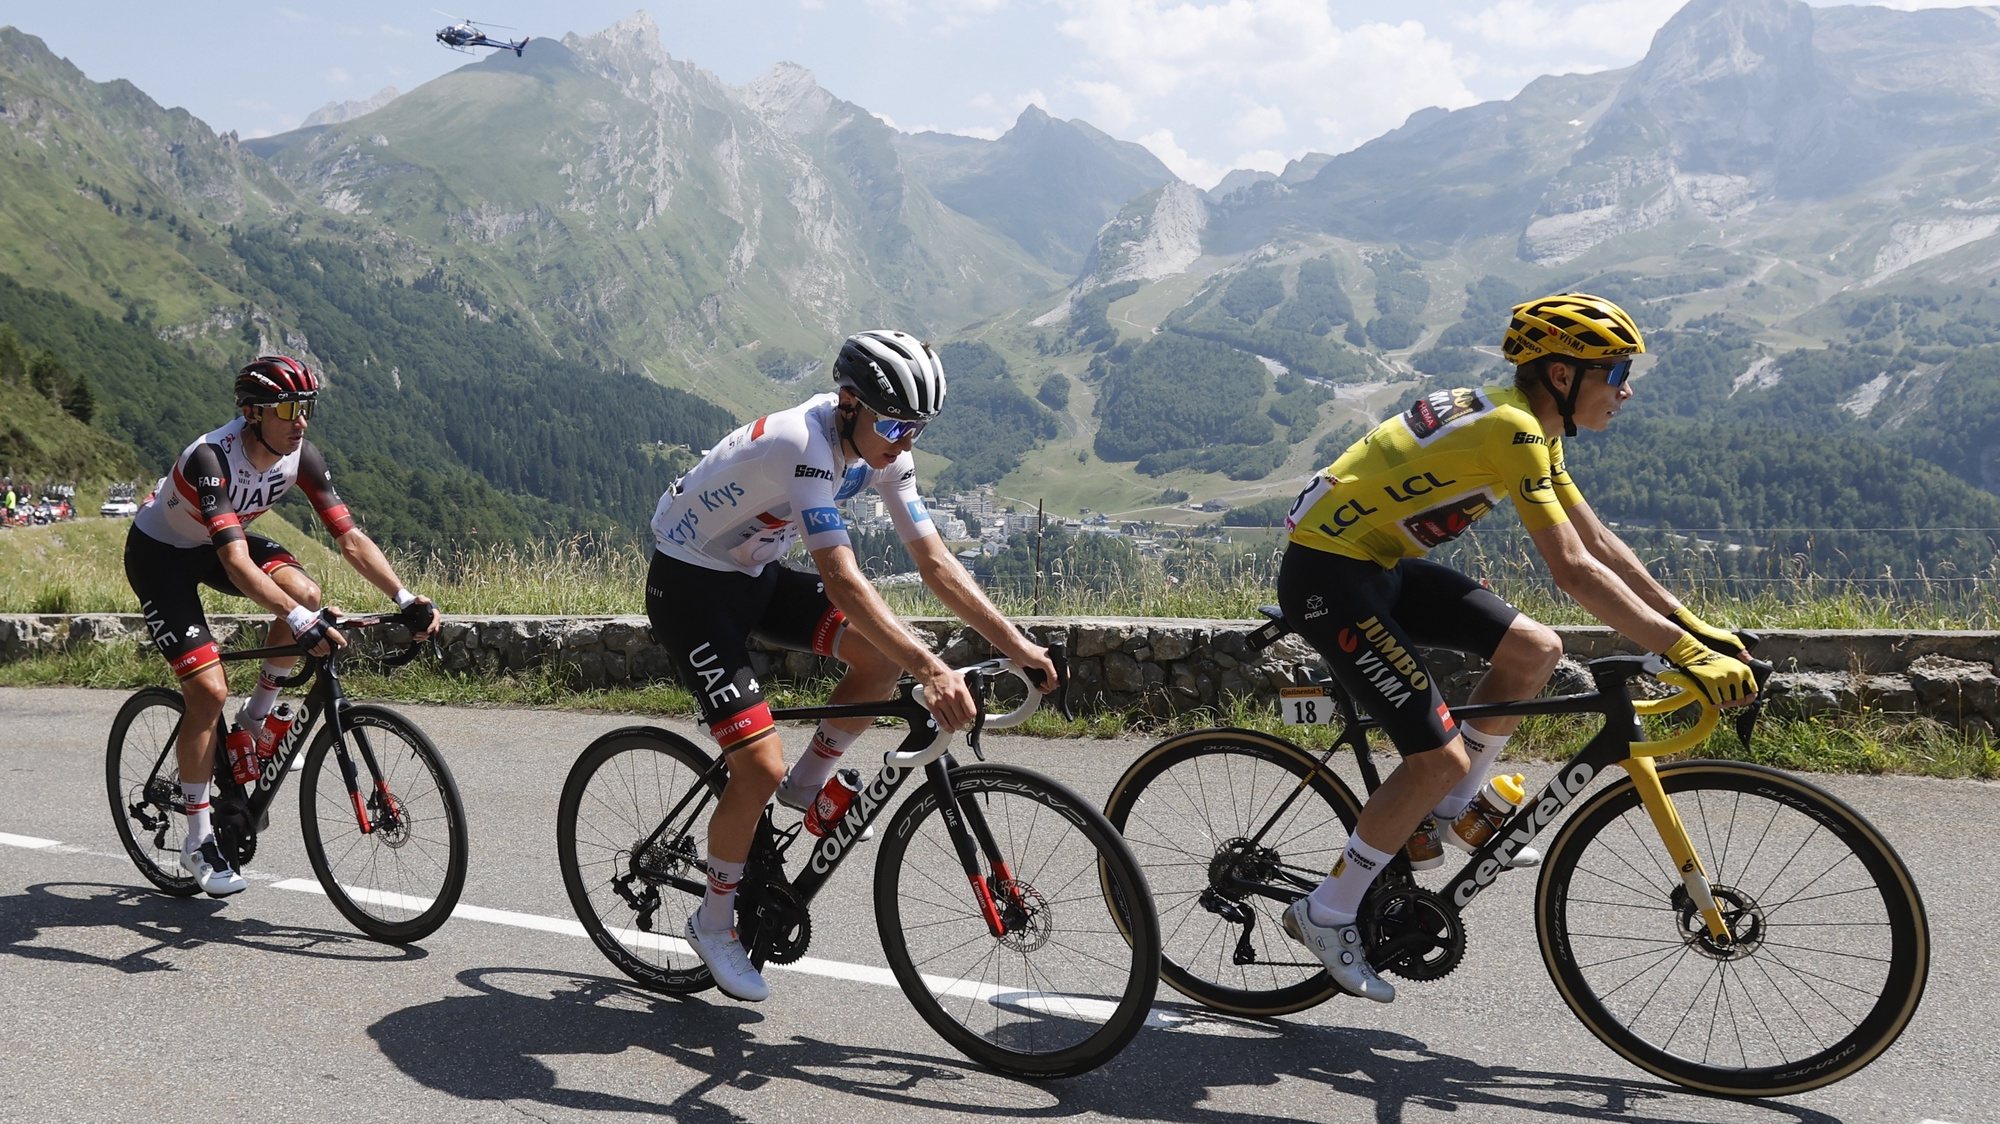 epa10084330 The Yellow Jersey Danish rider Jonas Vingegaard (R) of Jumbo Visma and Slovenian rider Tadej Pogacar (C) of UAE Team Emirates in action during the 18th stage of the Tour de France 2022 over 143.2km from Lourdes to Hautacam, France, 21 July 2022.  EPA/GUILLAUME HORCAJUELO